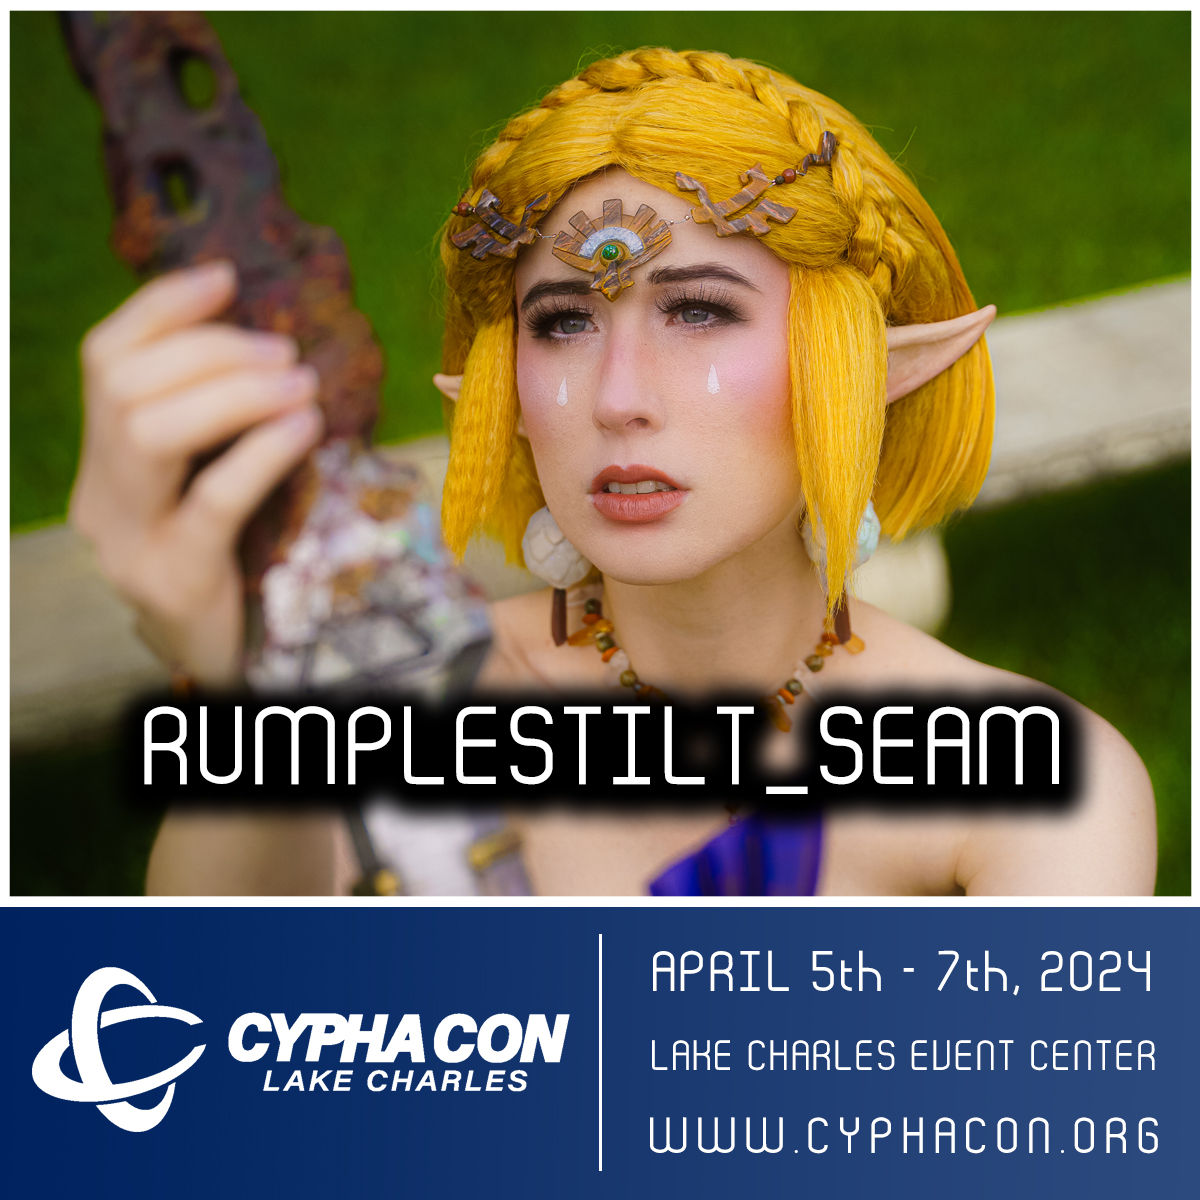 CYPHACON is pleased our final Cosplay Guest @RumplestiltSeam Rumplestilt_Seam will be joining us April 5th - 7th, 2024 at the @LCCivicCenter in Lake Charles Louisiana! For complete information visit our website, tickets on sale now! cyphacon.org/speakers/cospl…